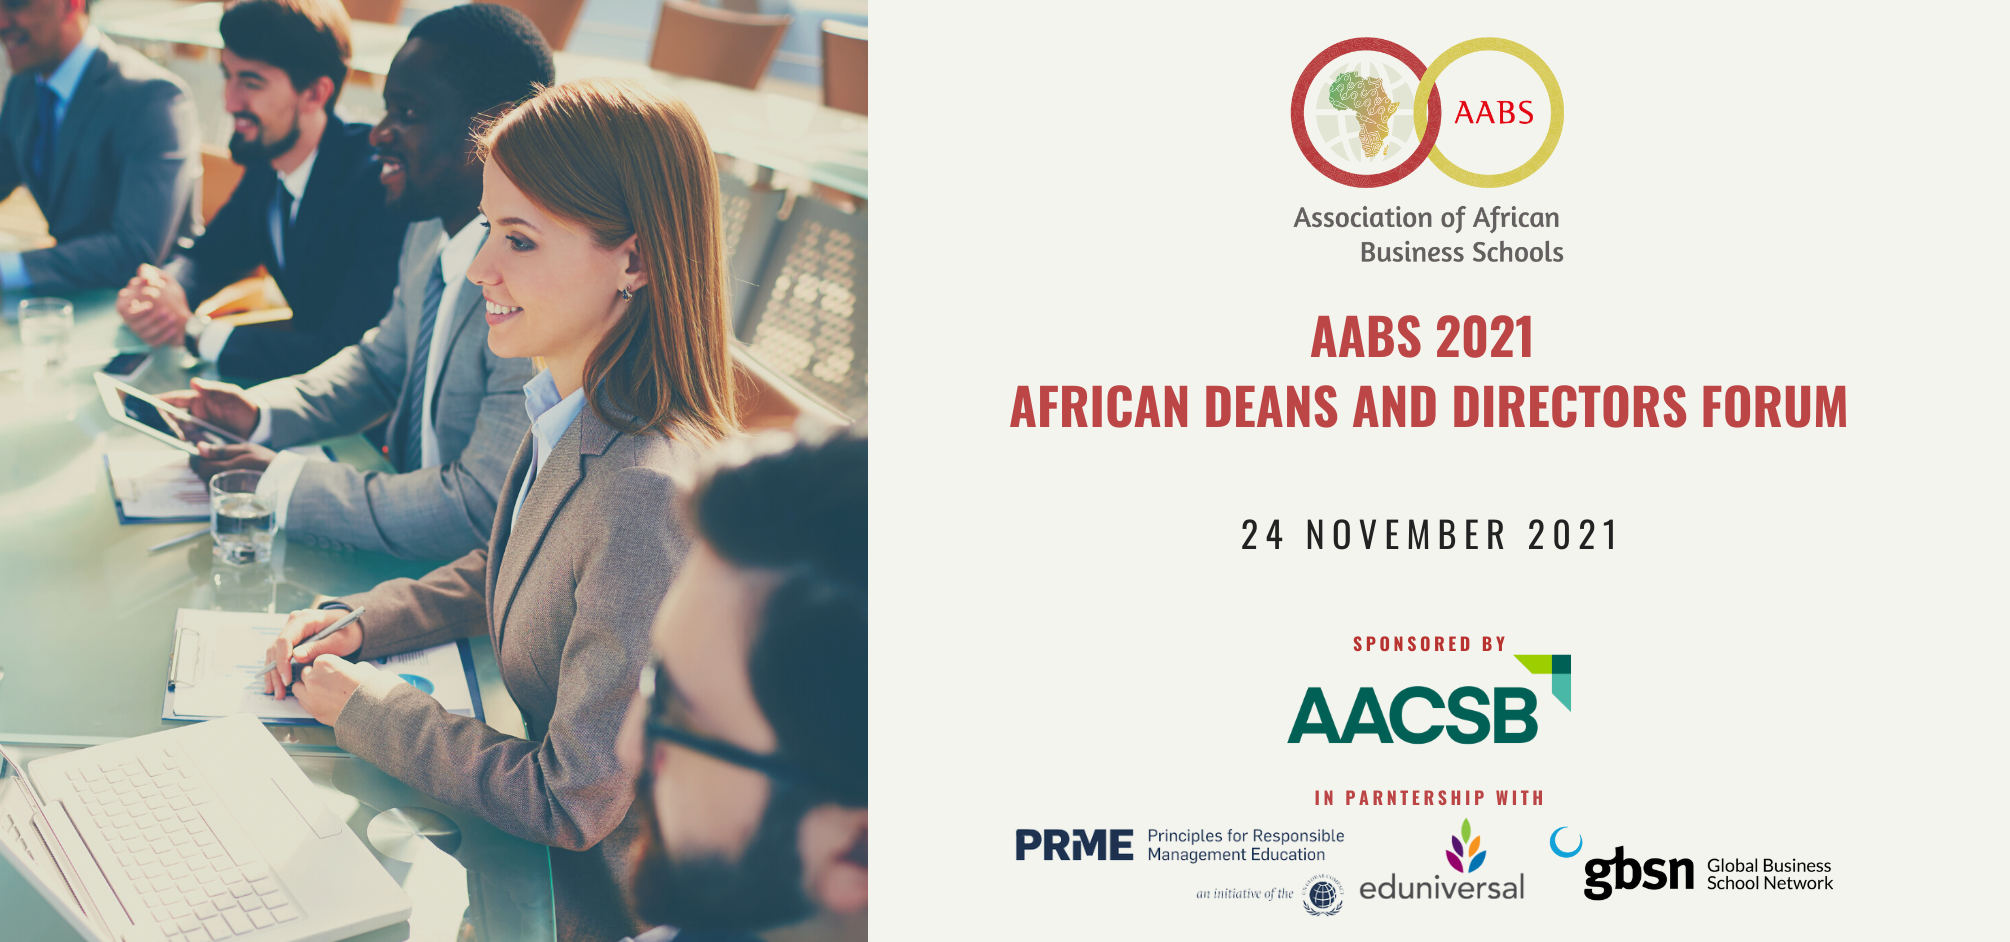 AABS 2021 African Deans and Directors Forum